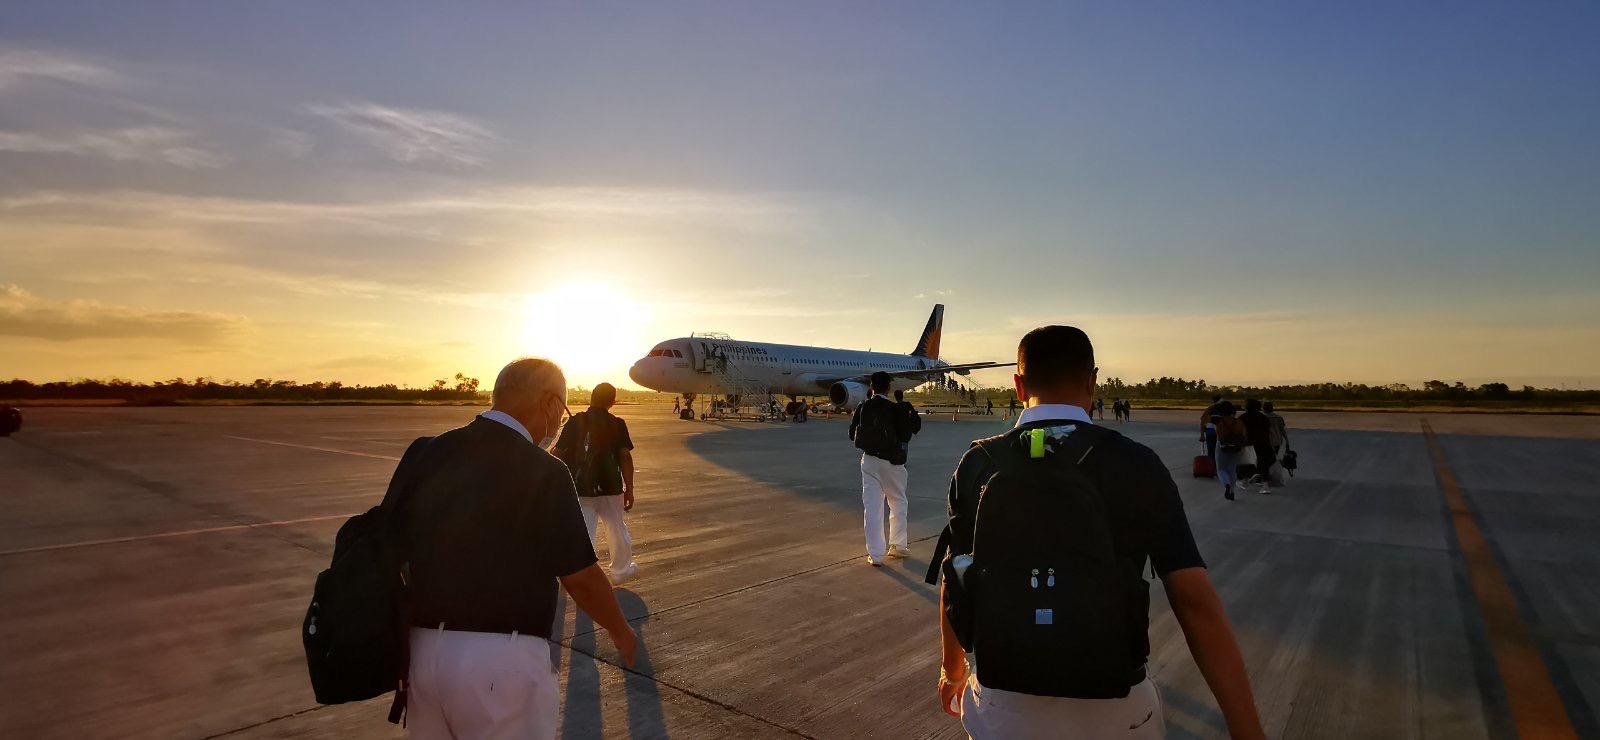 Tzu Chi volunteers walk to a plane that will take them to Bohol days after the wrath of Typhoon Odette. 【Photo by Johnny Kwok】